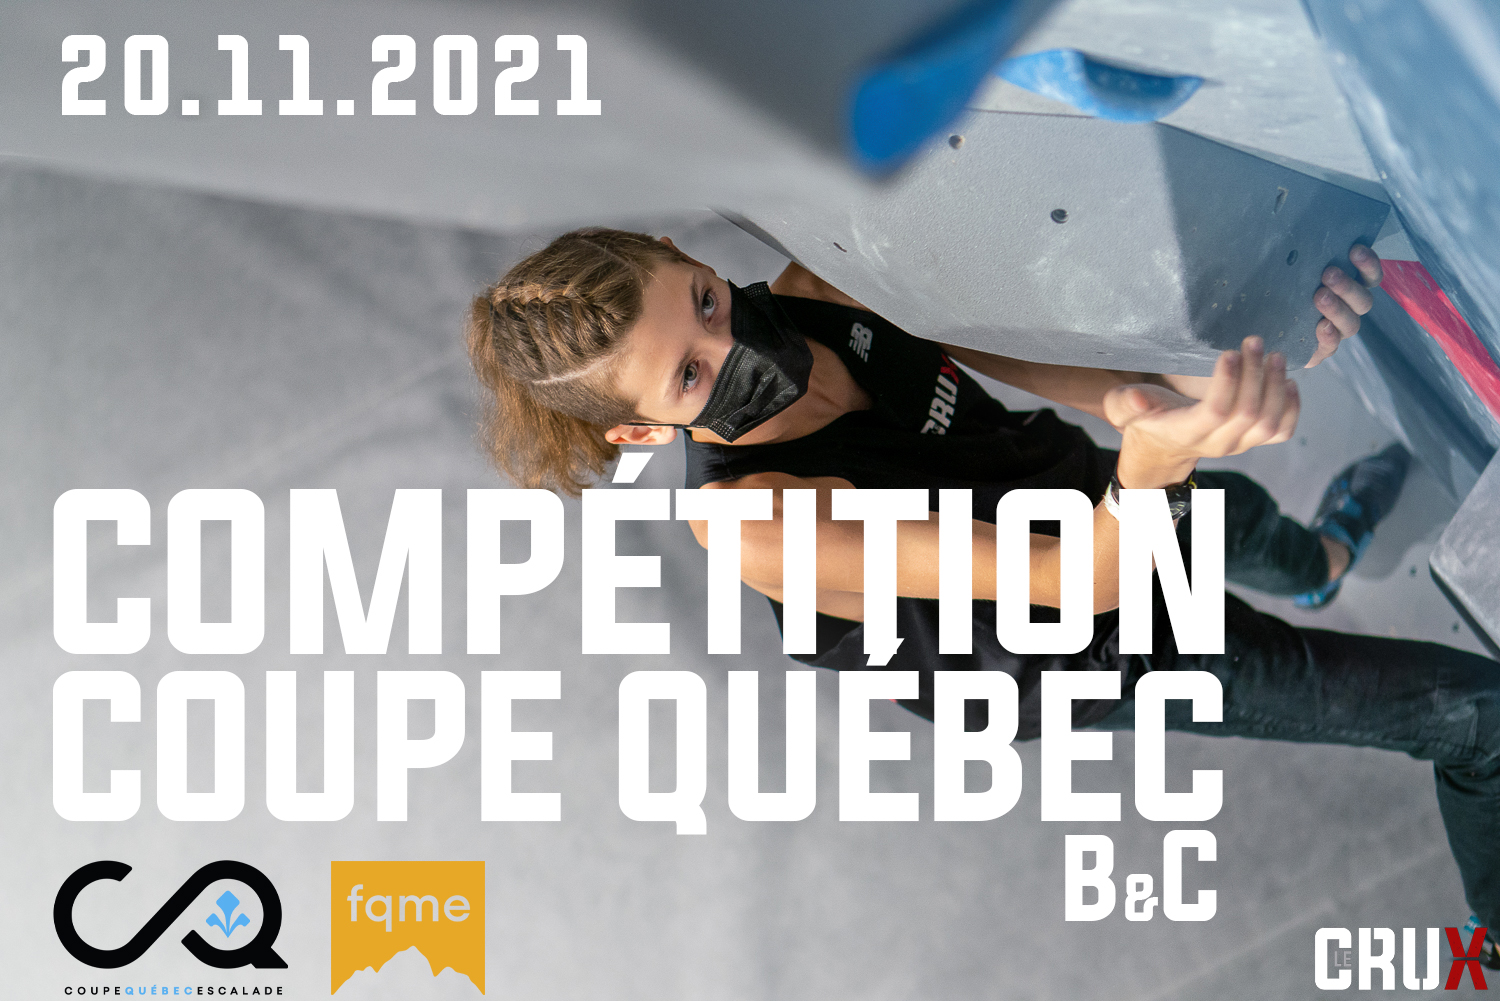 Upcoming events at the bouldering and climbing center - Laval, Rive-Nord, Laurentides